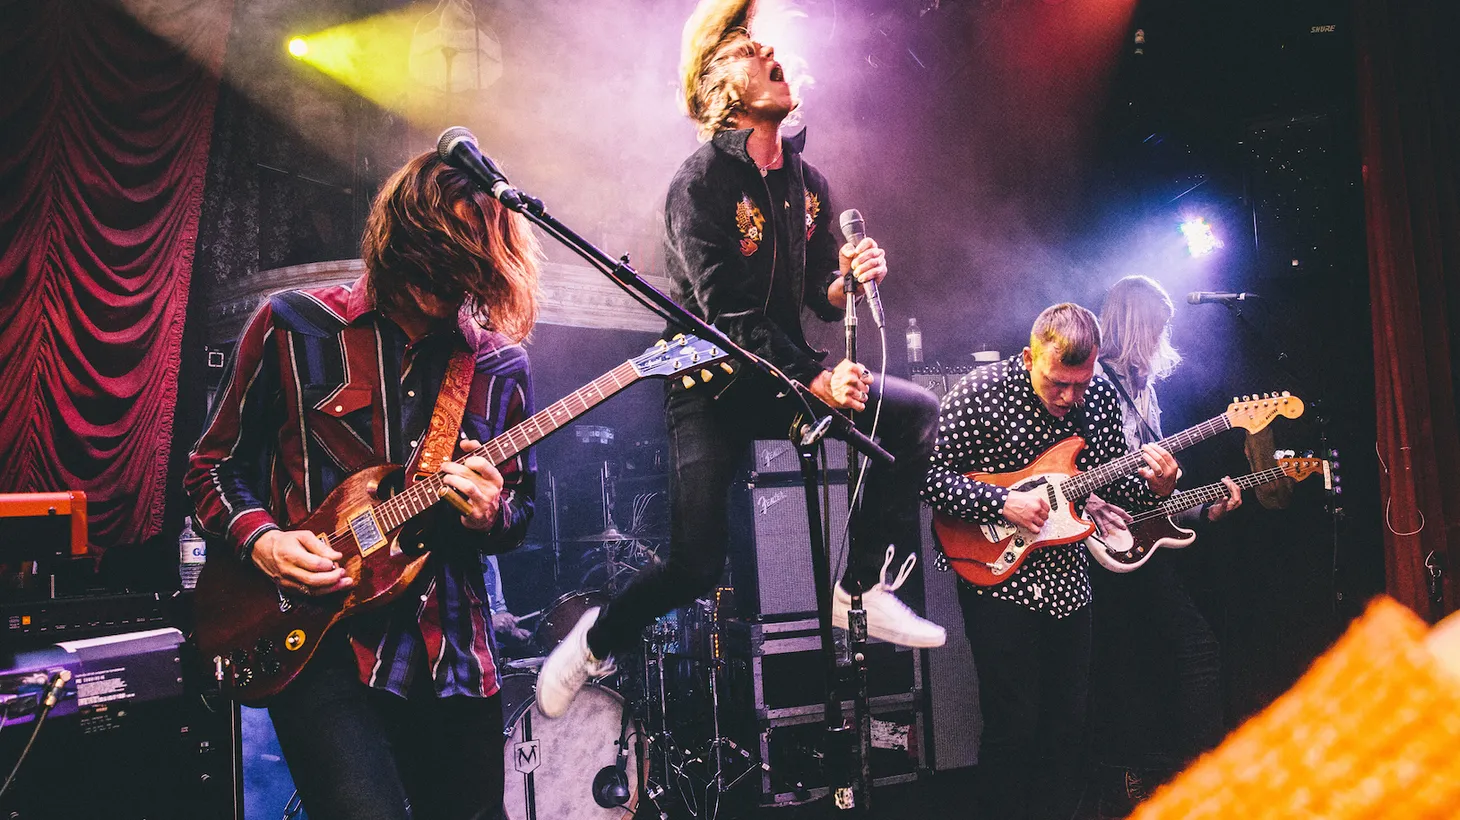 Kentucky rockers Cage the Elephant are now based in Nashville and turned to one of the city's most celebrated musical residents -- the Black Keys' Dan Auerbach – to produce their fourth album.